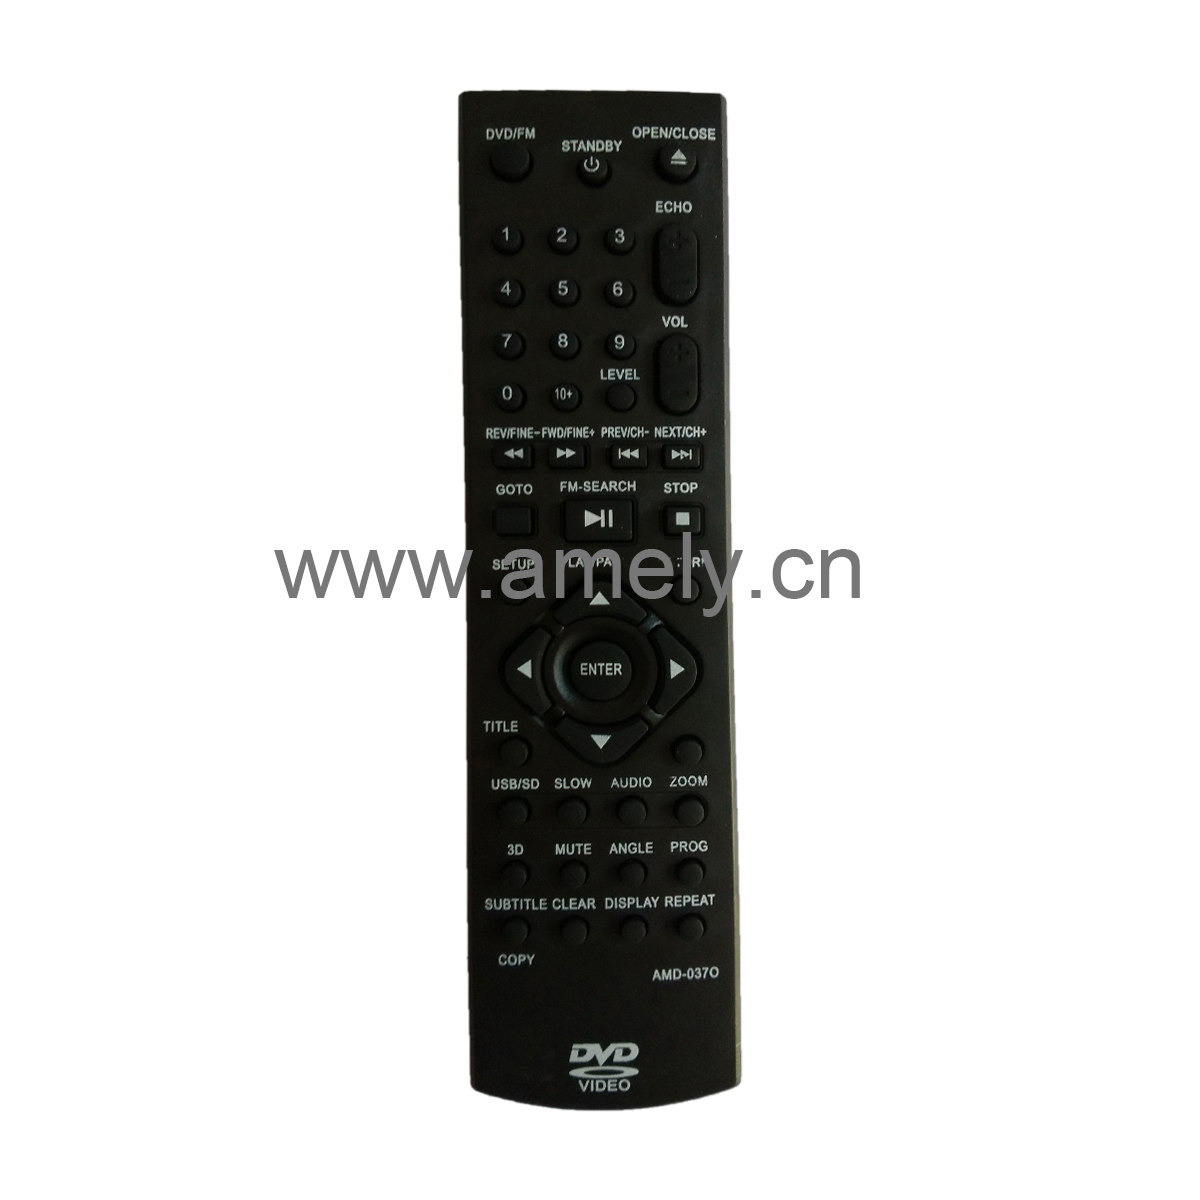 US$ 1.20 - 6711R1P089A-6 / Use for DVD remote control - China